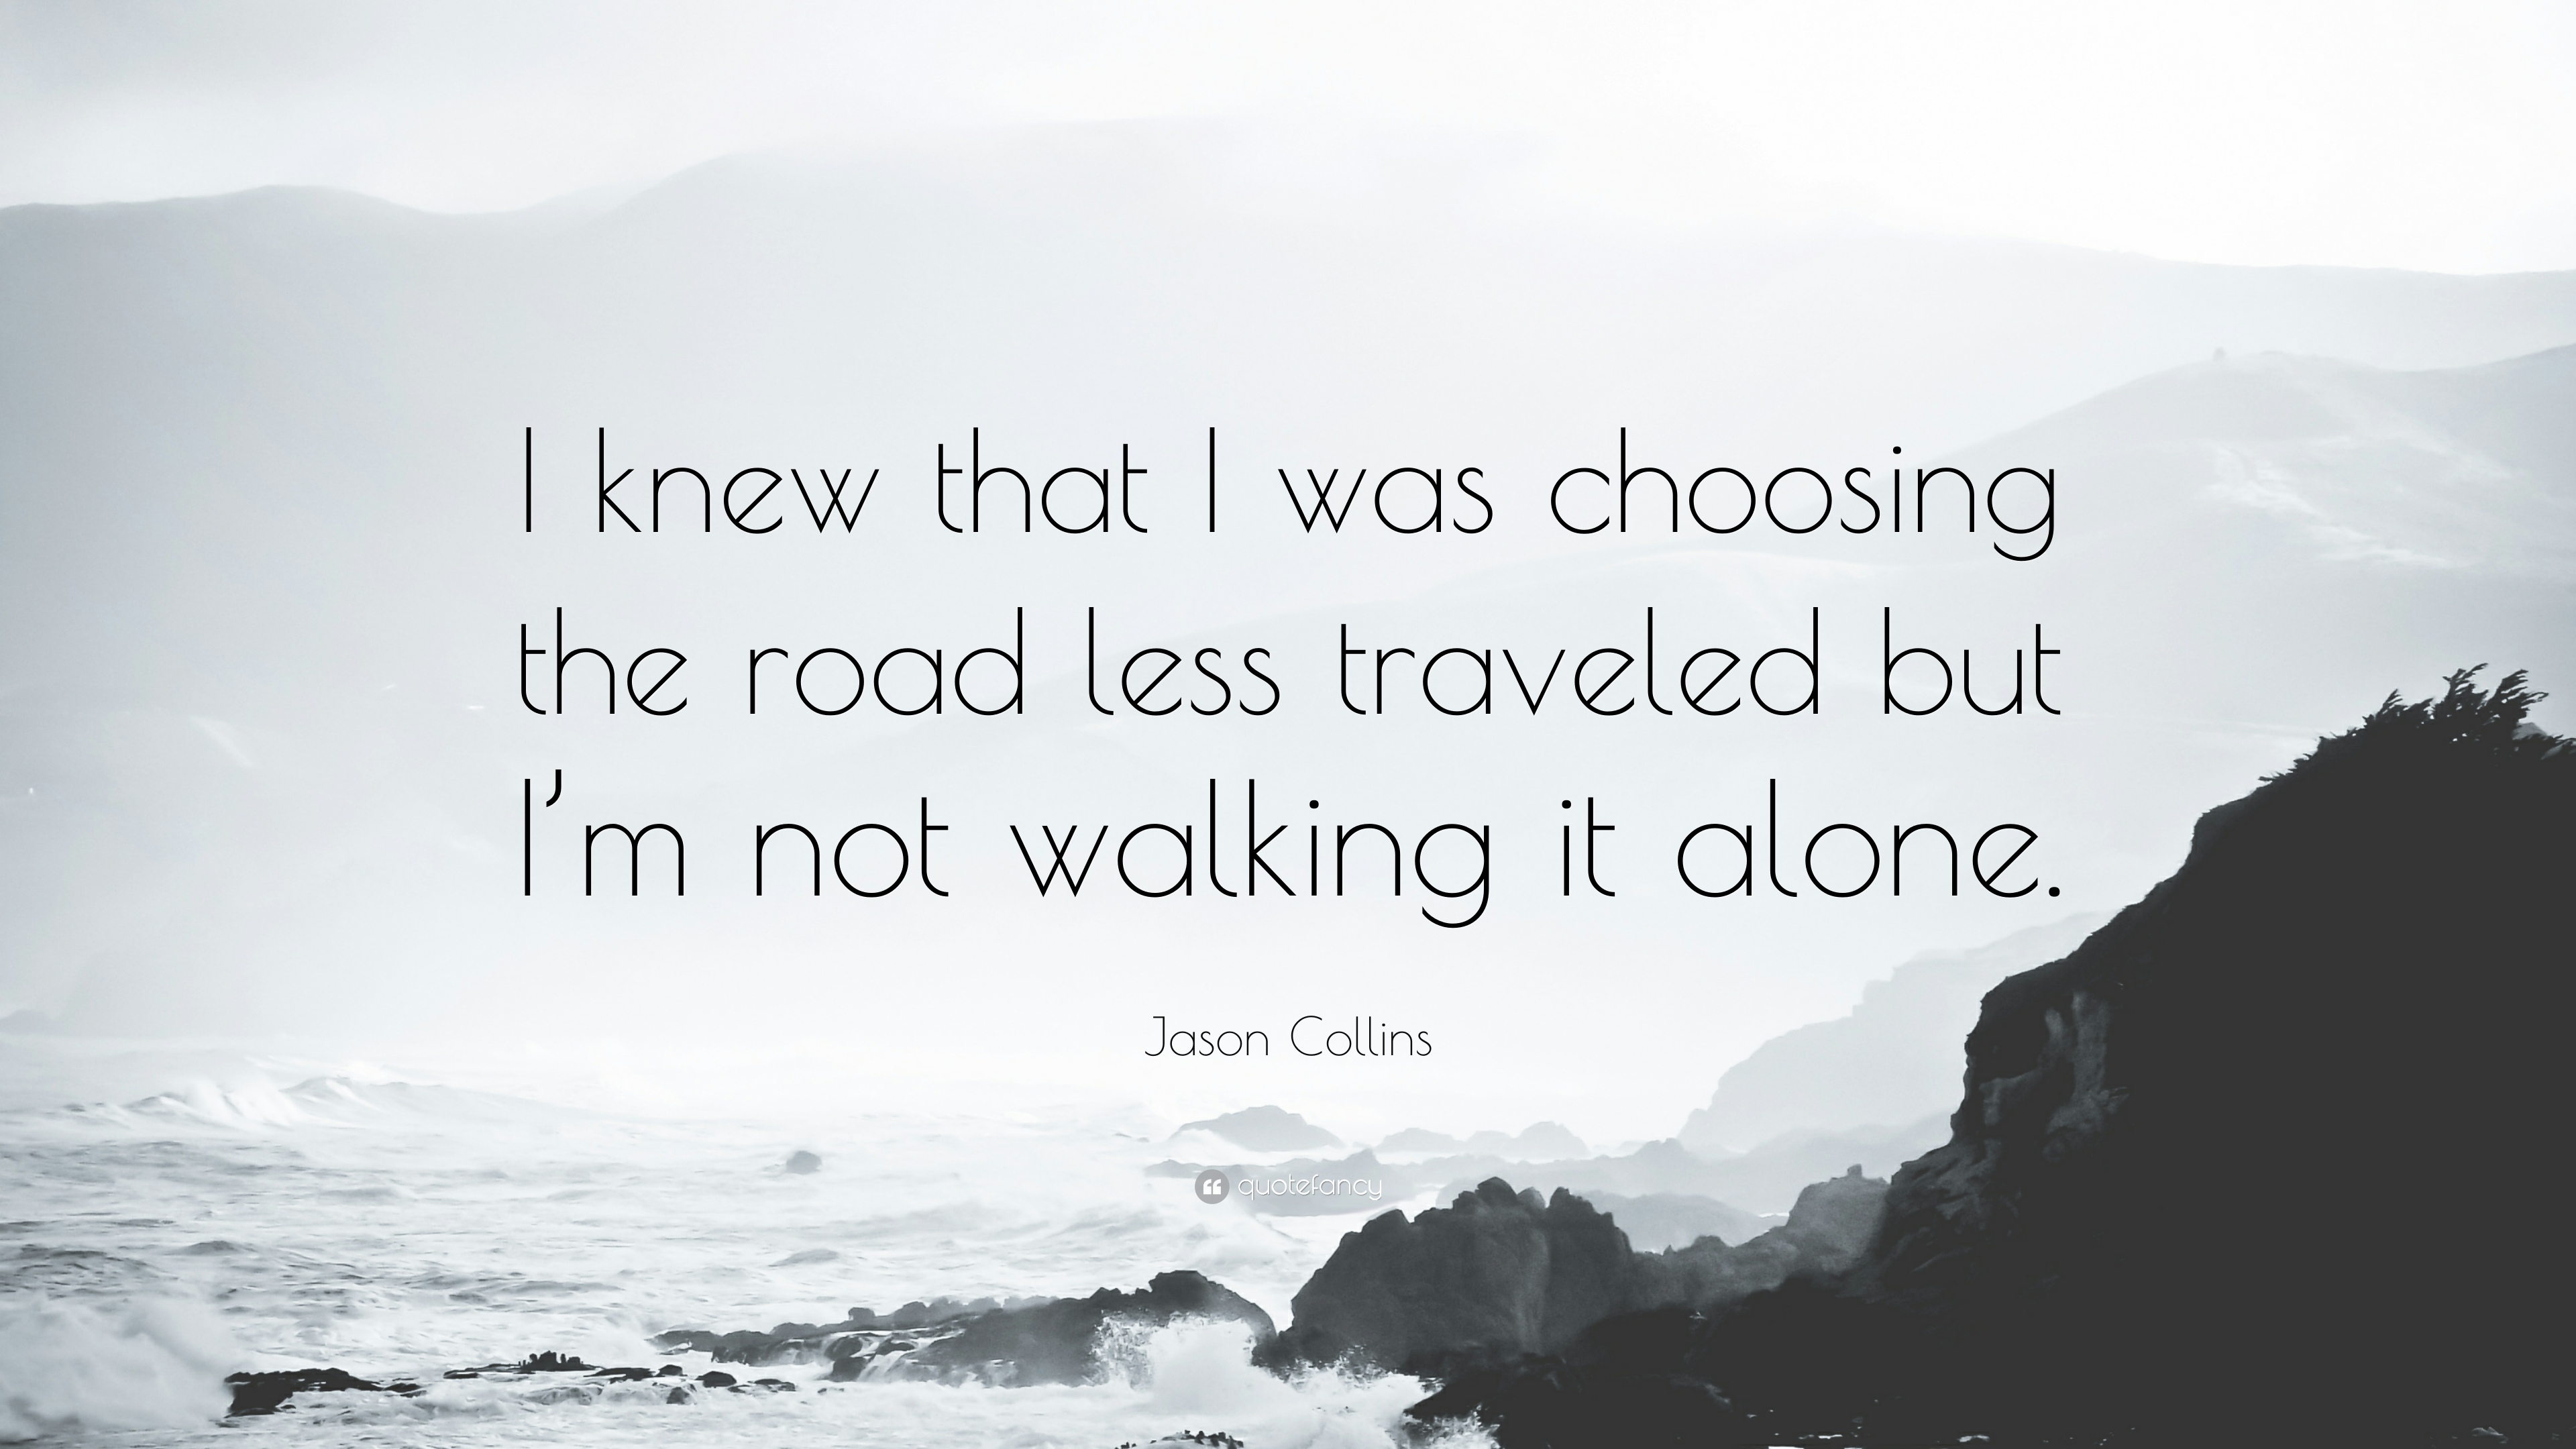 Jason Collins Quote: “I knew that I was choosing the road less